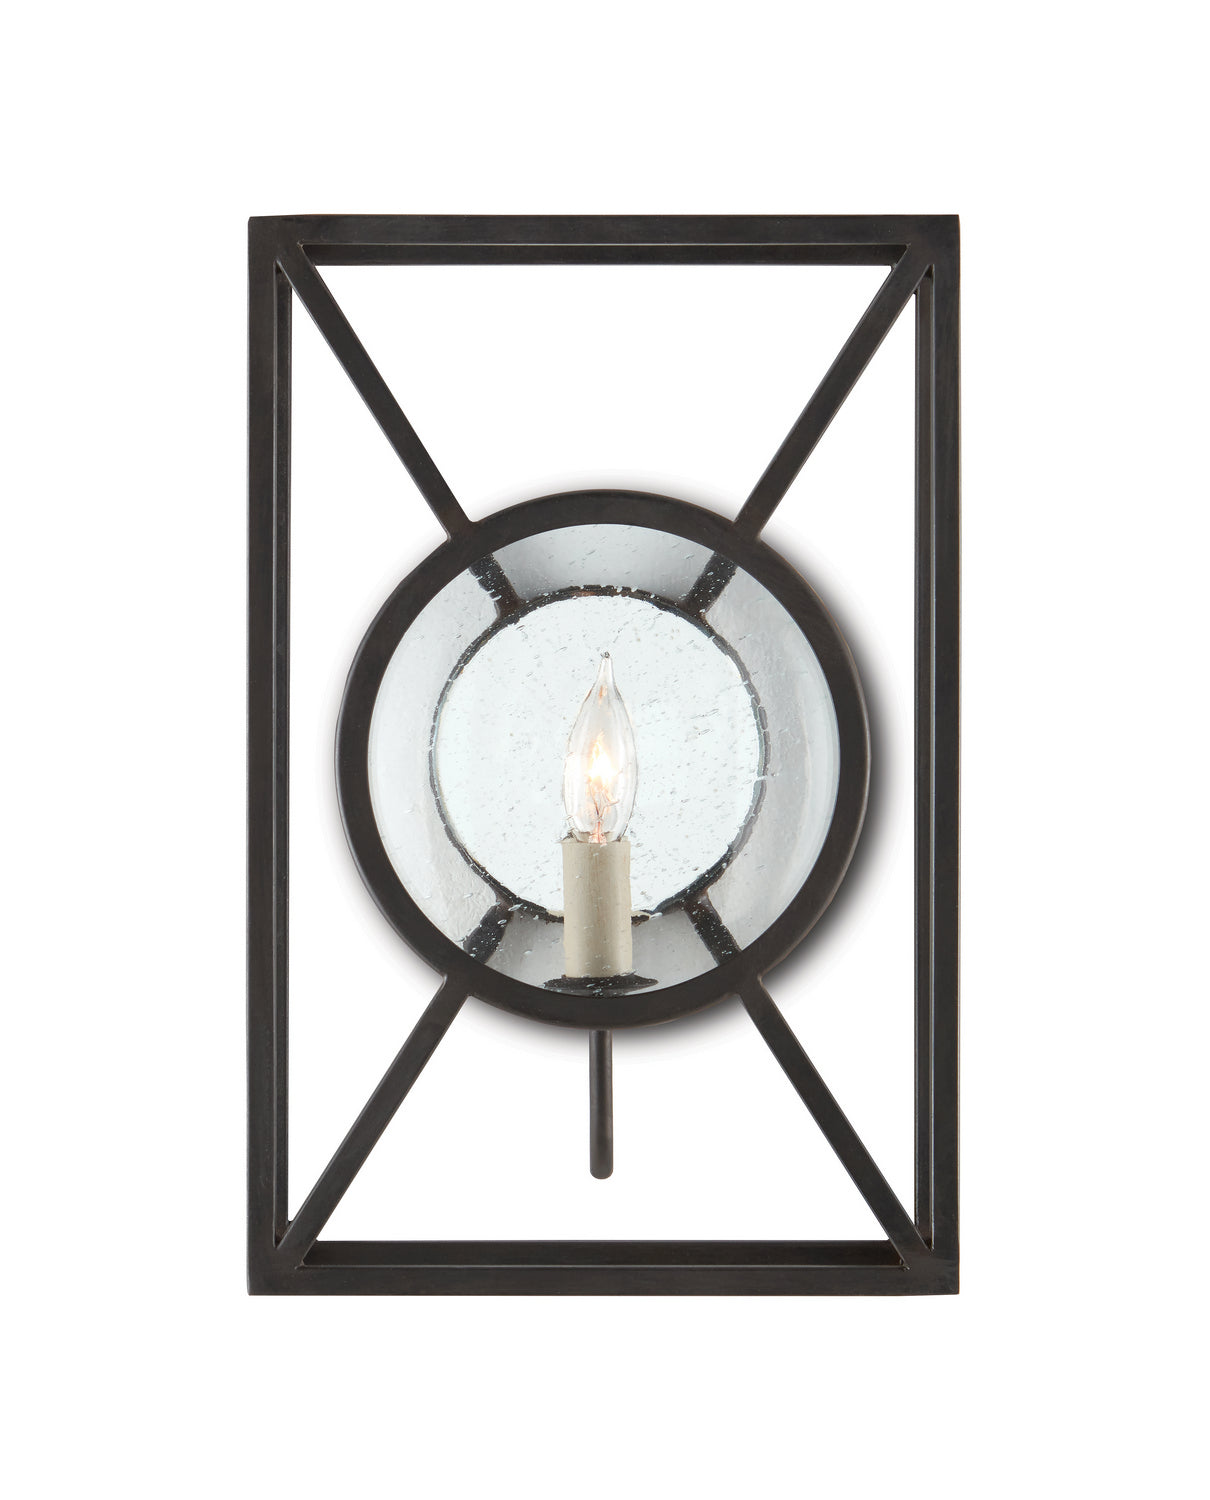 One Light Wall Sconce from the Lillian August collection in Old Iron finish